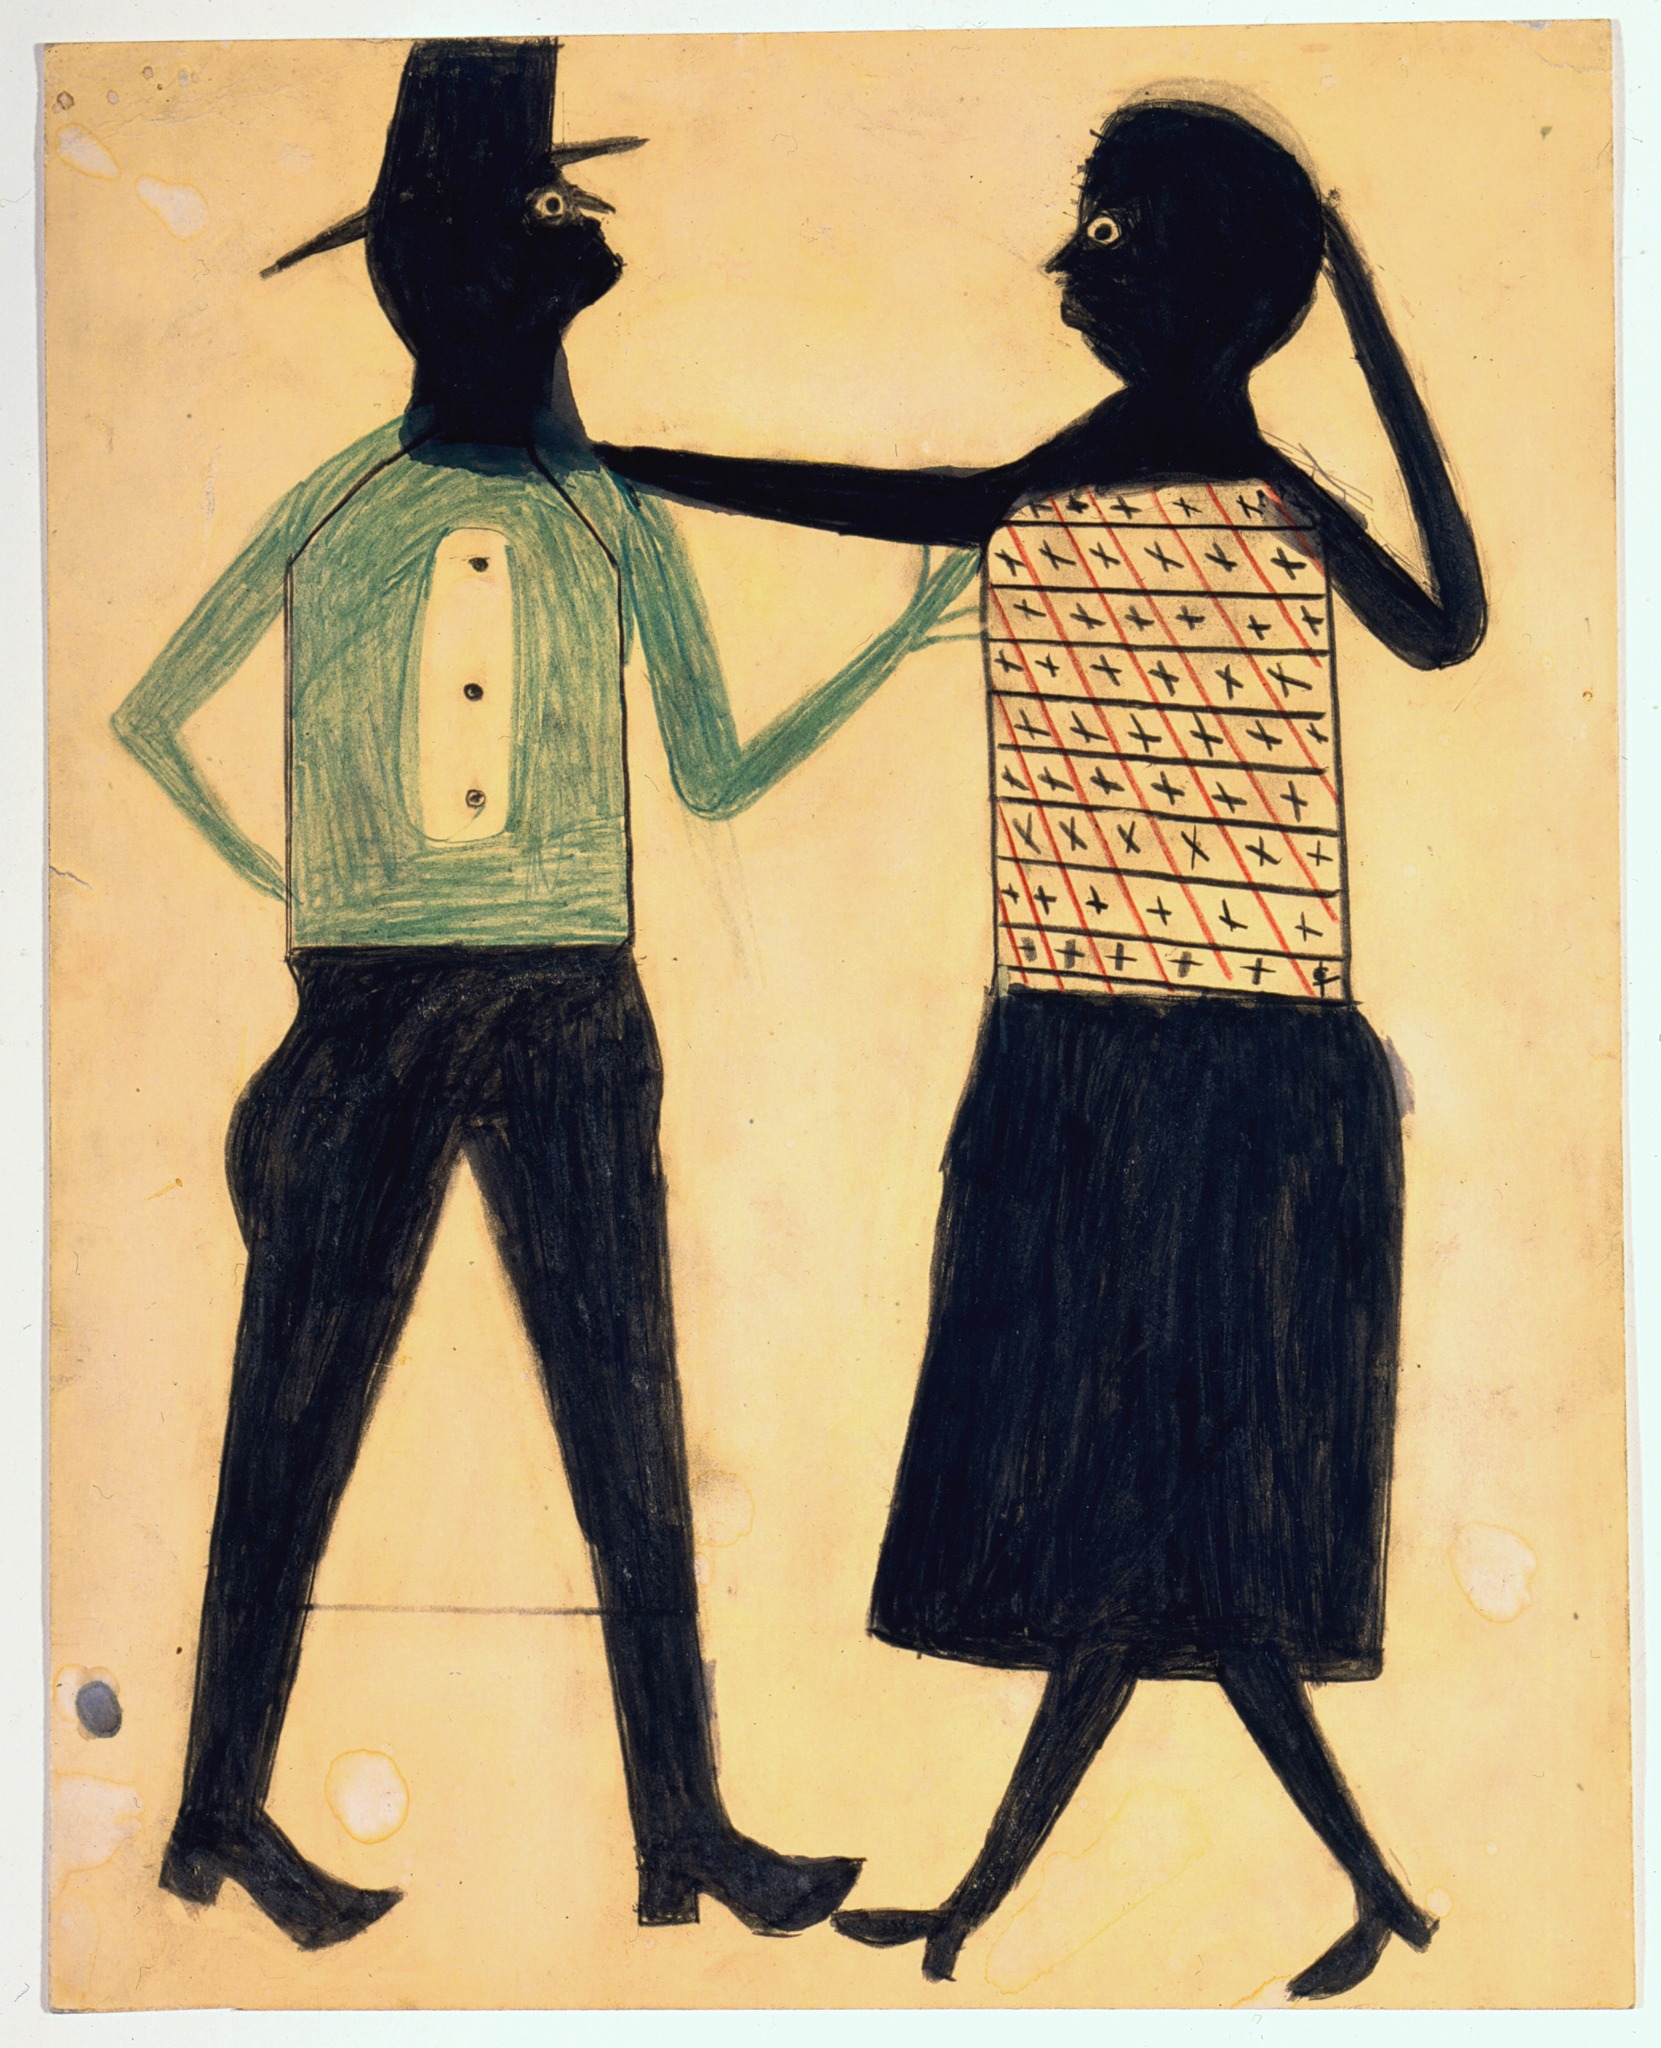 Sin título (Hombre y mujer) by Bill Traylor - c.1939 - 1942 High Museum of Art